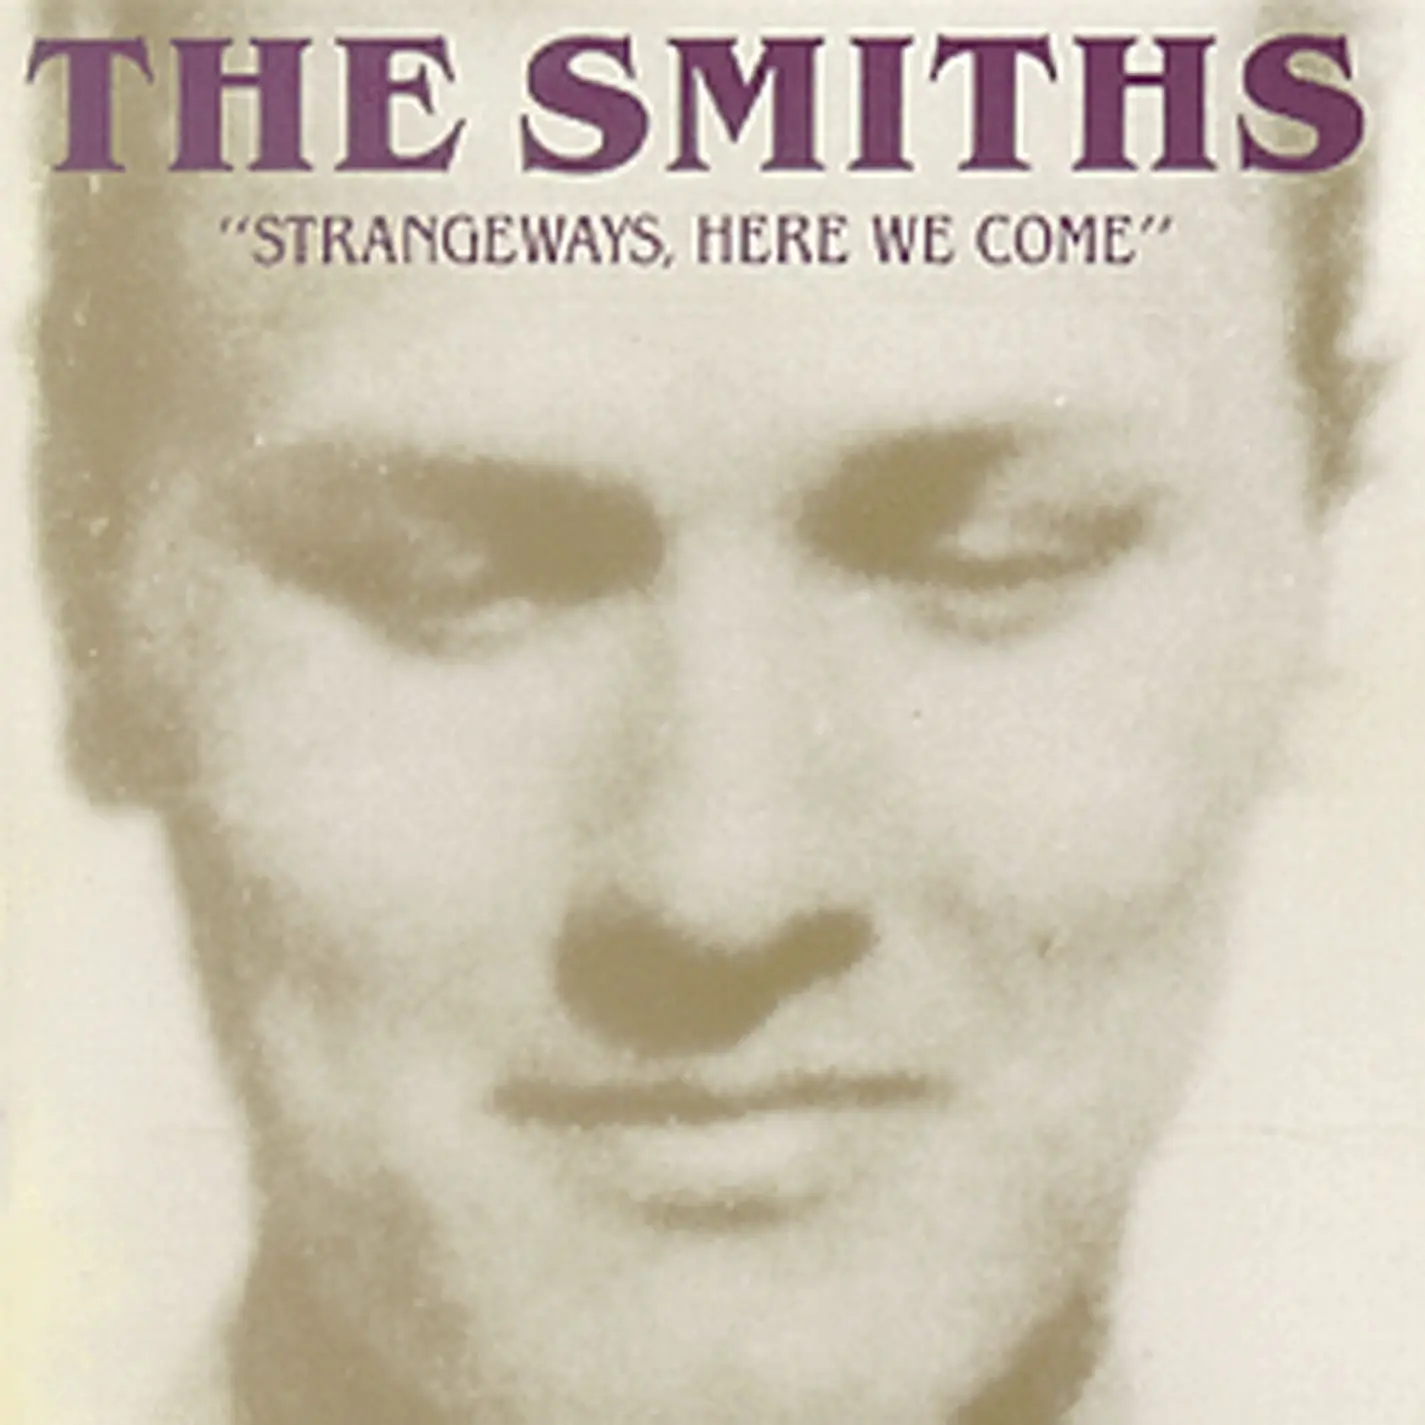 <strong>The Smiths - Strangeways, Here We Come</strong> (Vinyl LP - black)